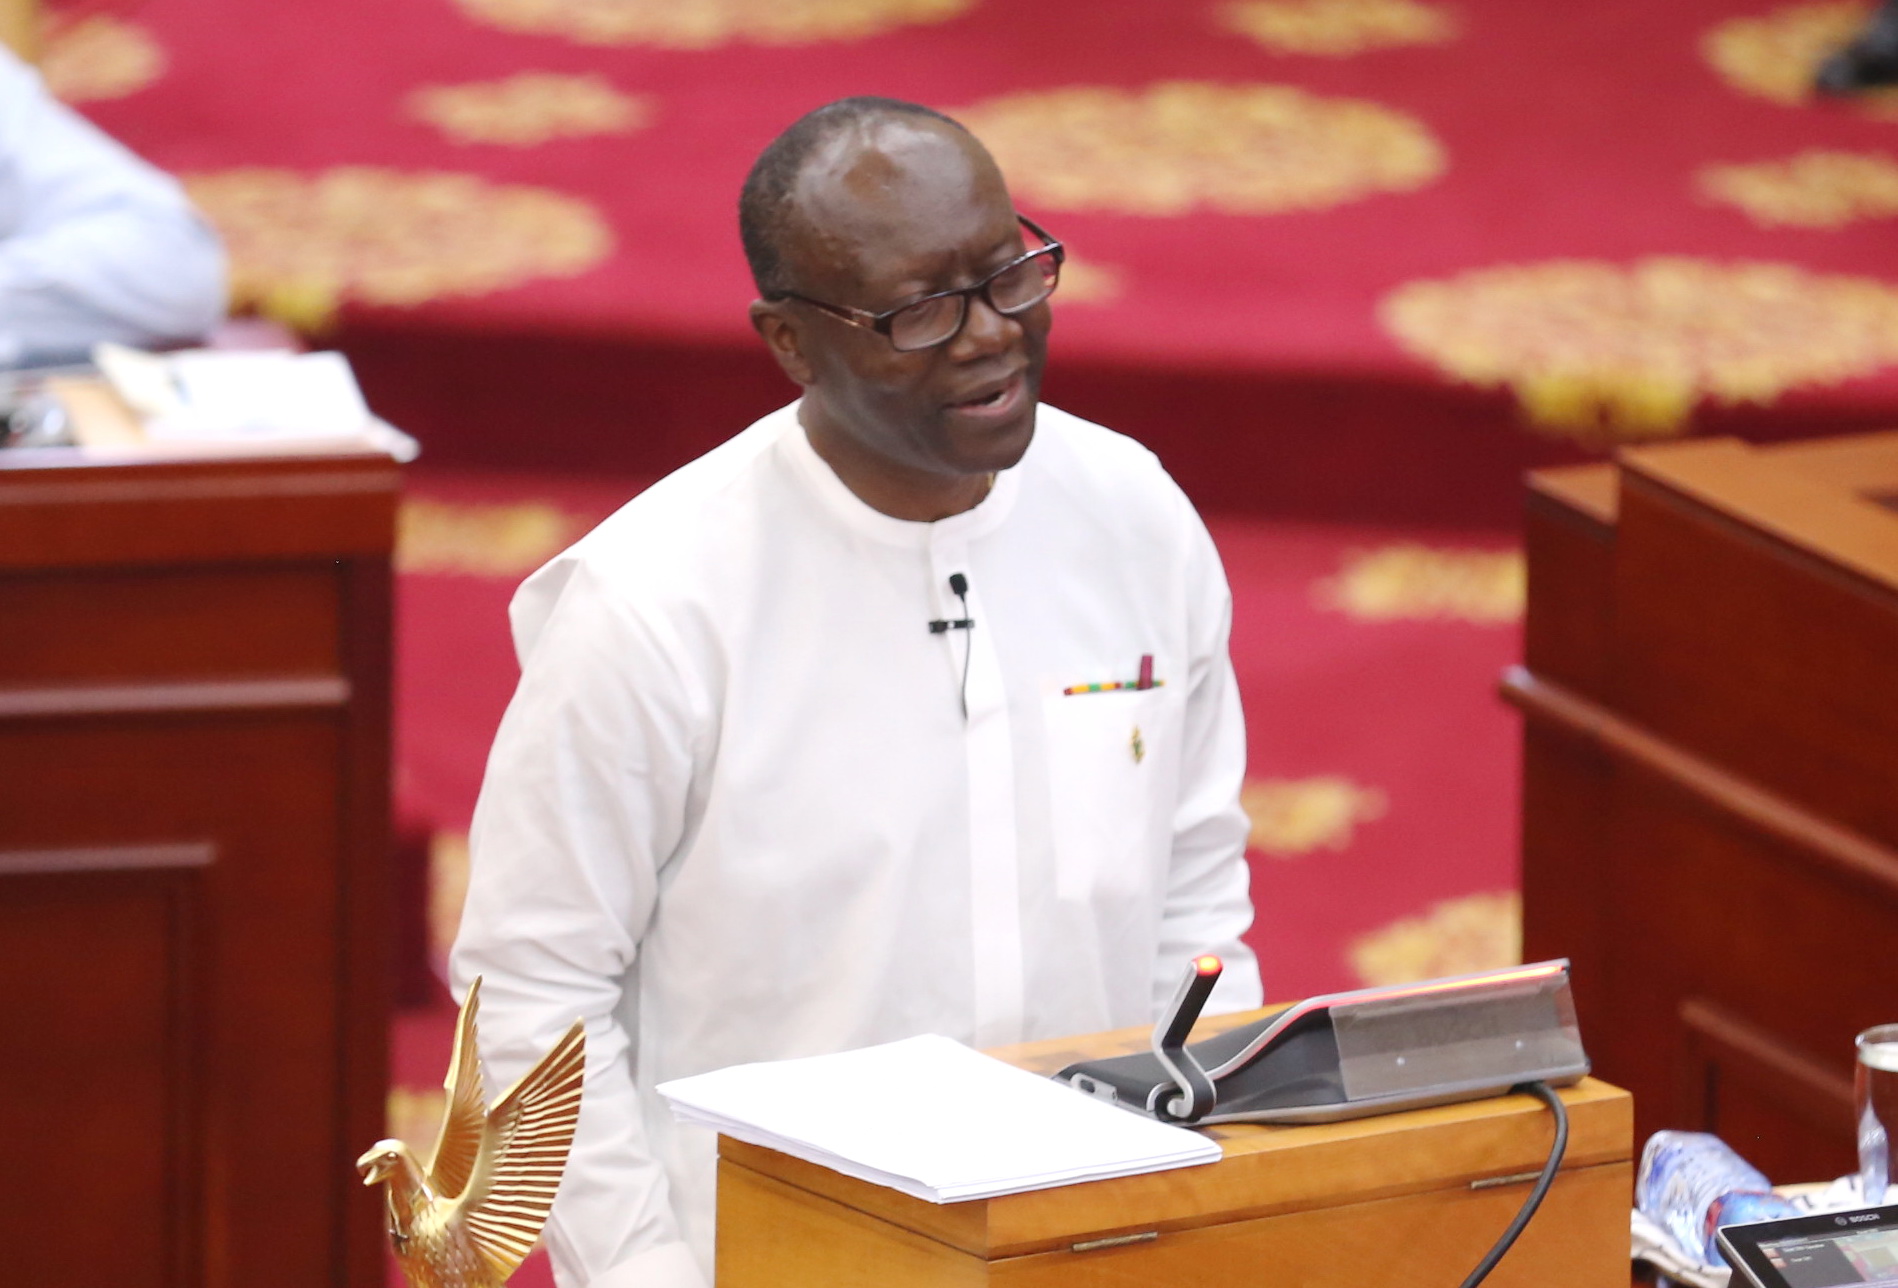 La General Hospital Will Be Completed On Schedule… Ken Ofori-Atta Assures